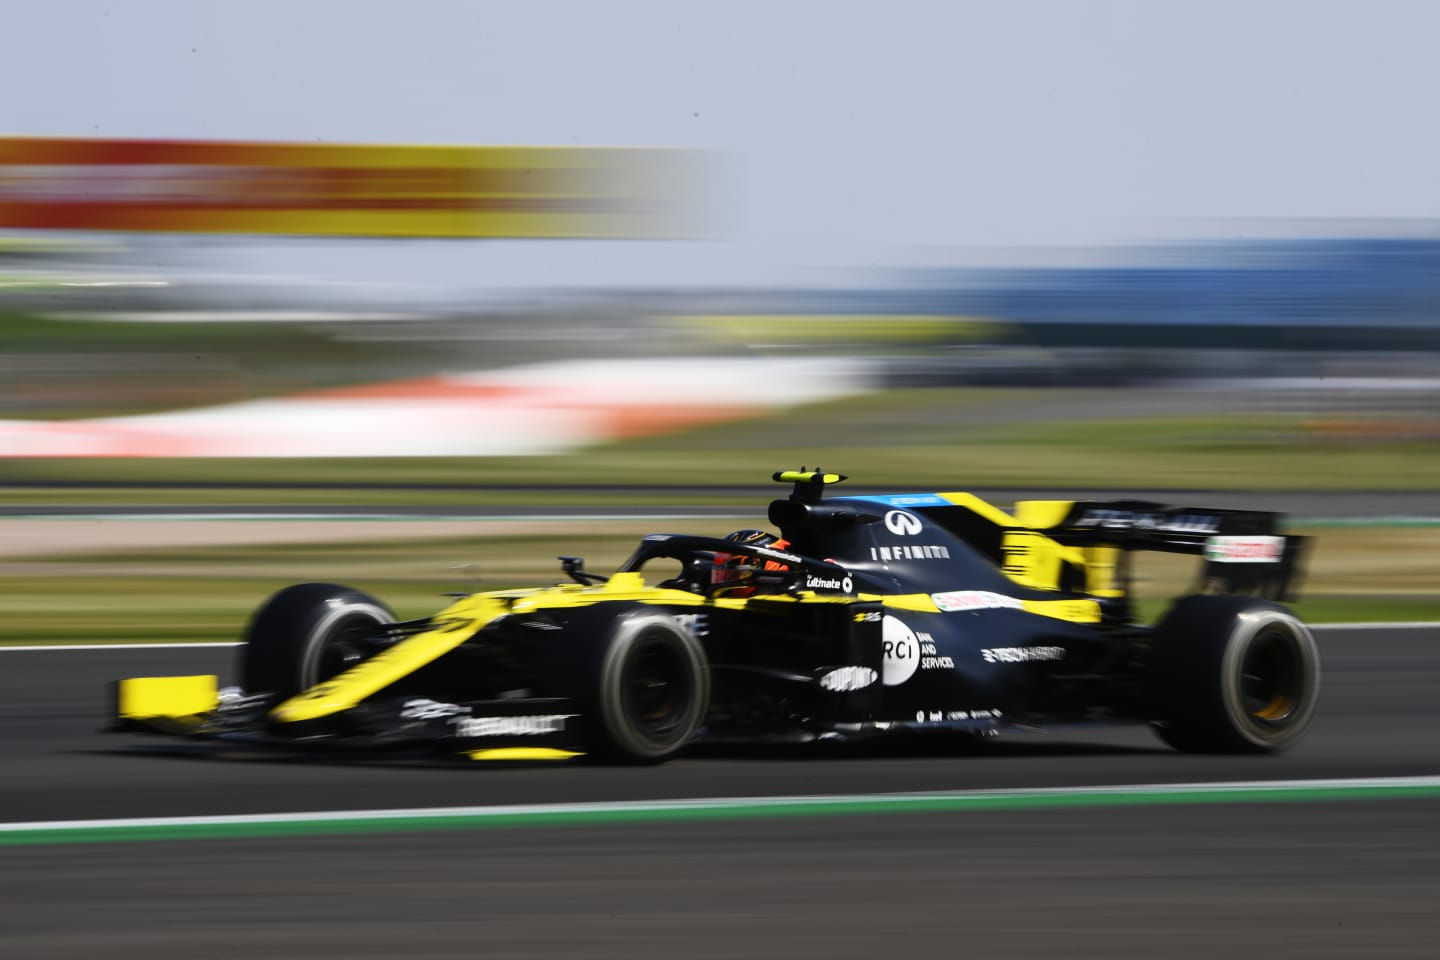 NORTHAMPTON, ENGLAND - AUGUST 09: Esteban Ocon of France driving the (31) Renault Sport Formula One Team RS20 during the F1 70th Anniversary Grand Prix at Silverstone on August 09, 2020 in Northampton, England. (Photo by Rudy Carezzevoli/Getty Images)